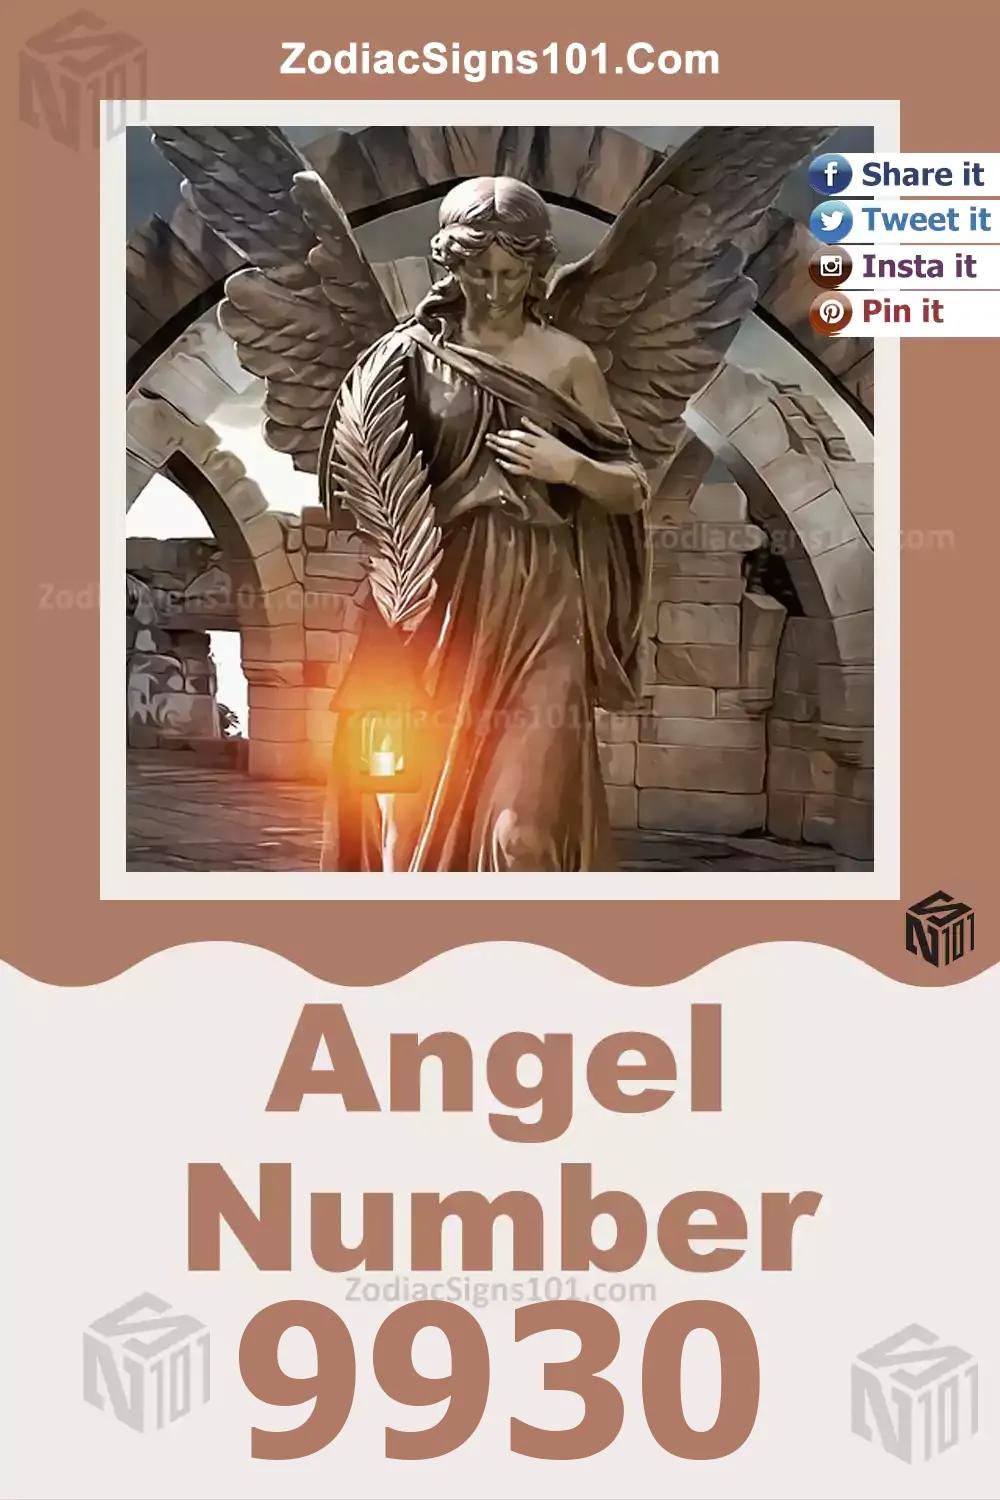 9930 Angel Number Meaning